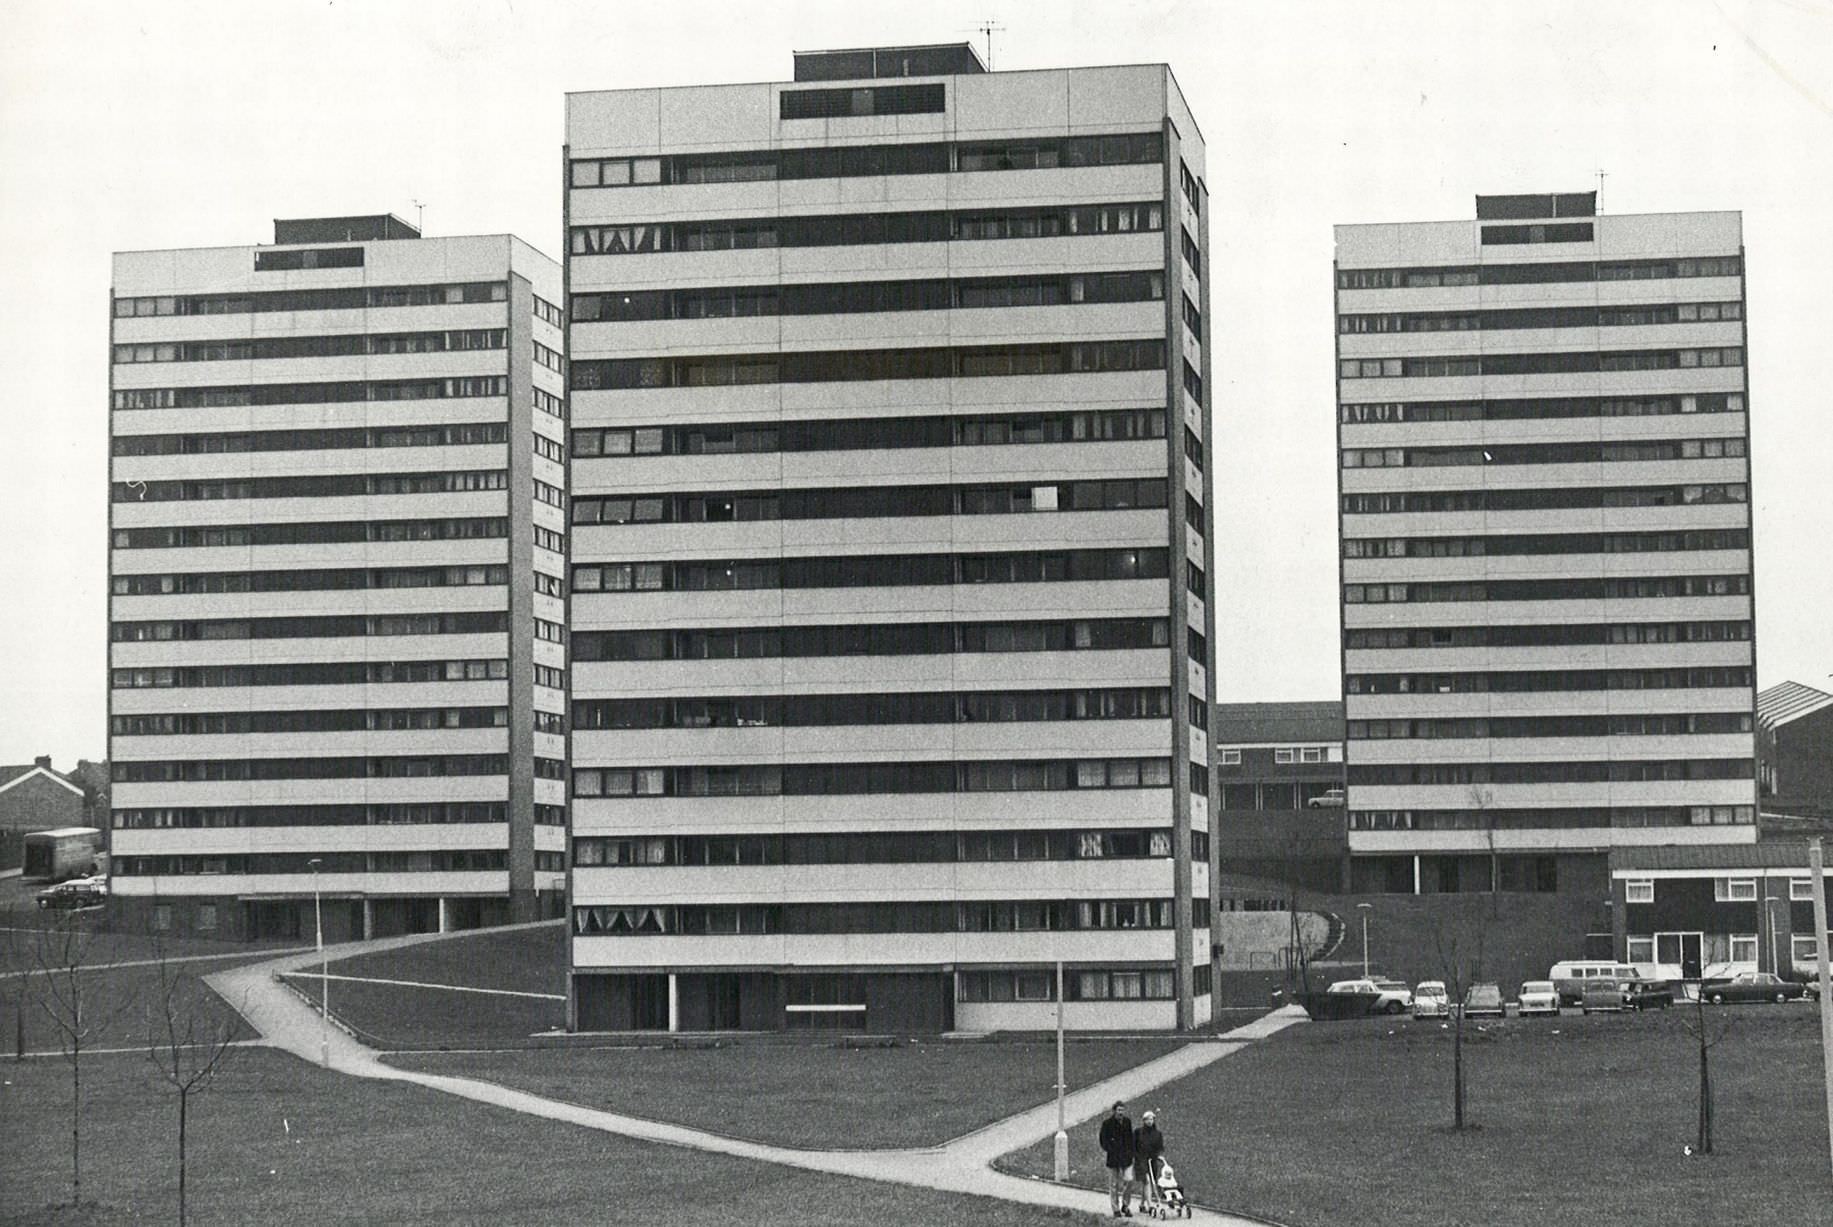 Flats at Stechford, with Giles Close House in the centre, in 1961.